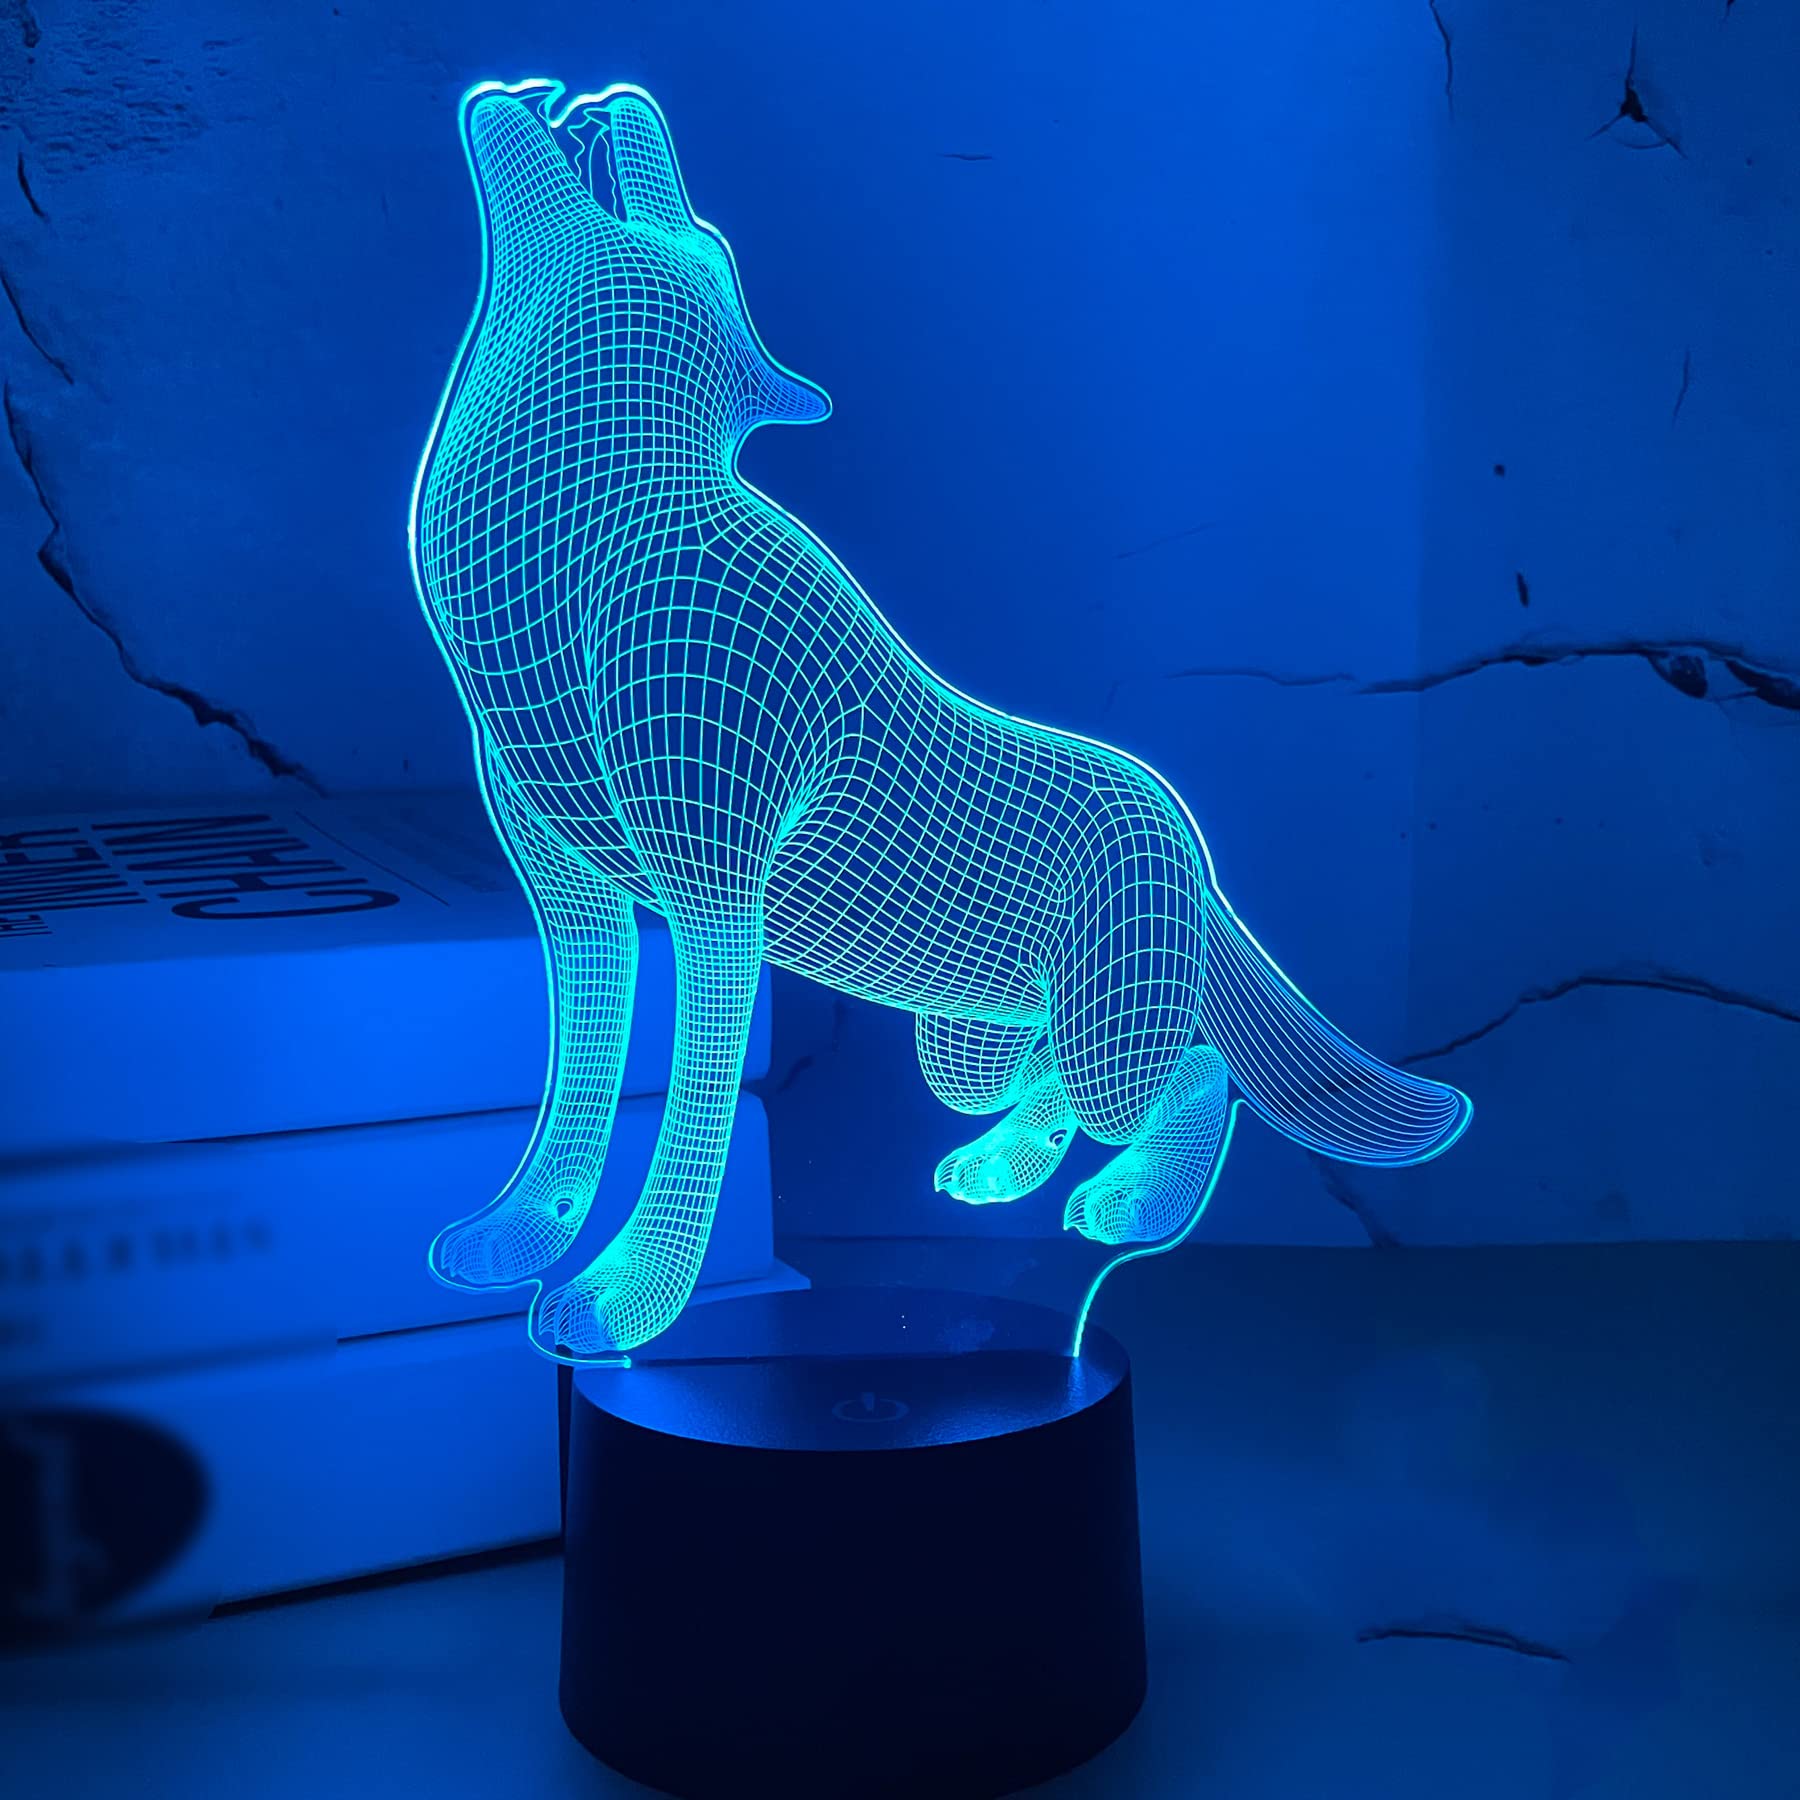 FULLOSUN Wolf Gift 3D Light, Optical Illusion Bedside Night Lamp, 16 Color Changing with Remote Control Creative Room Decor Best Birthday for Kids Boys Men